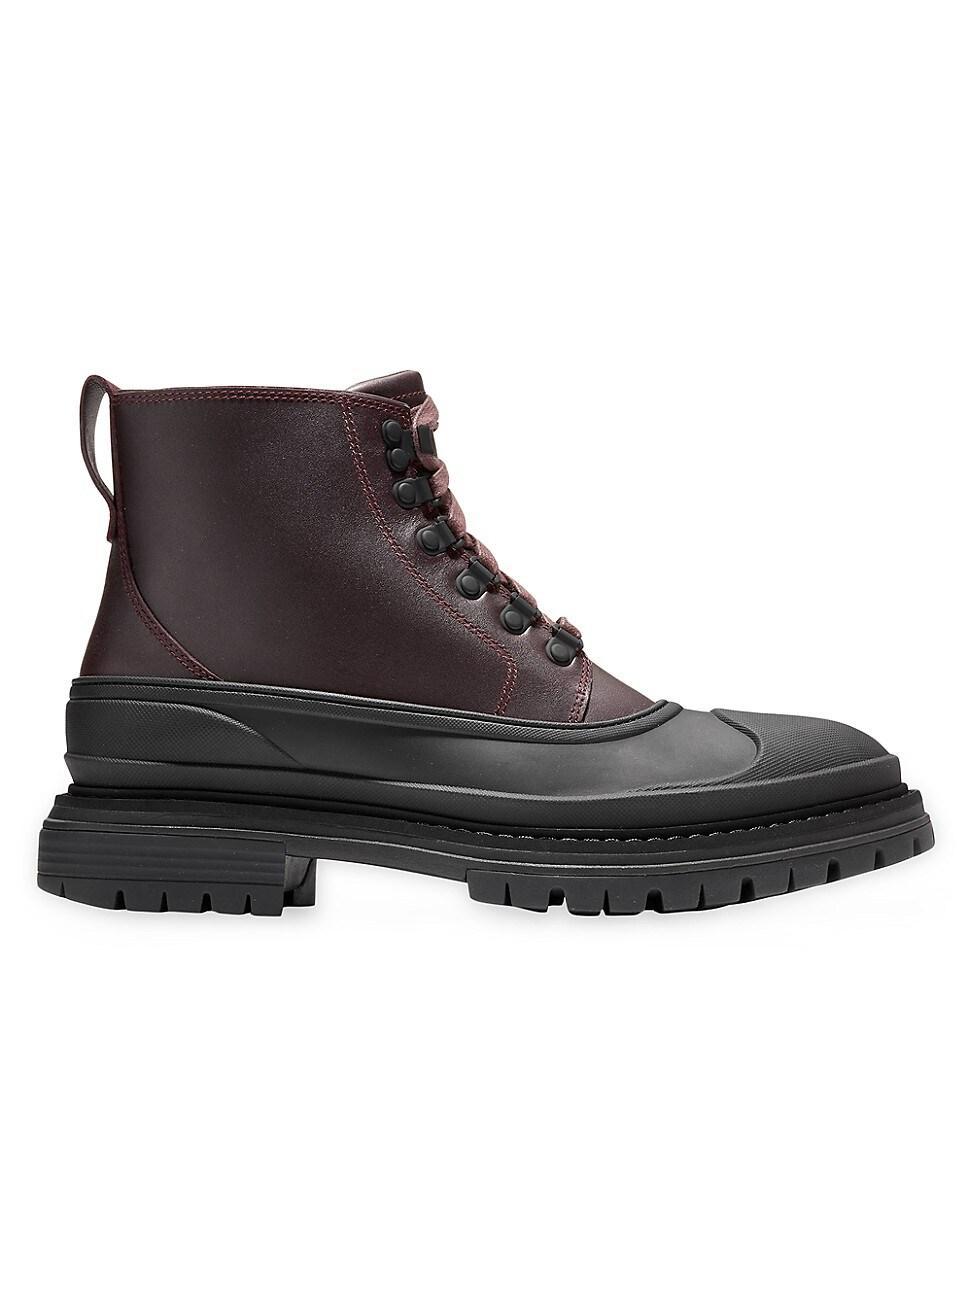 Mens Stratton Shroud Leather Lug-Sole Boots Product Image